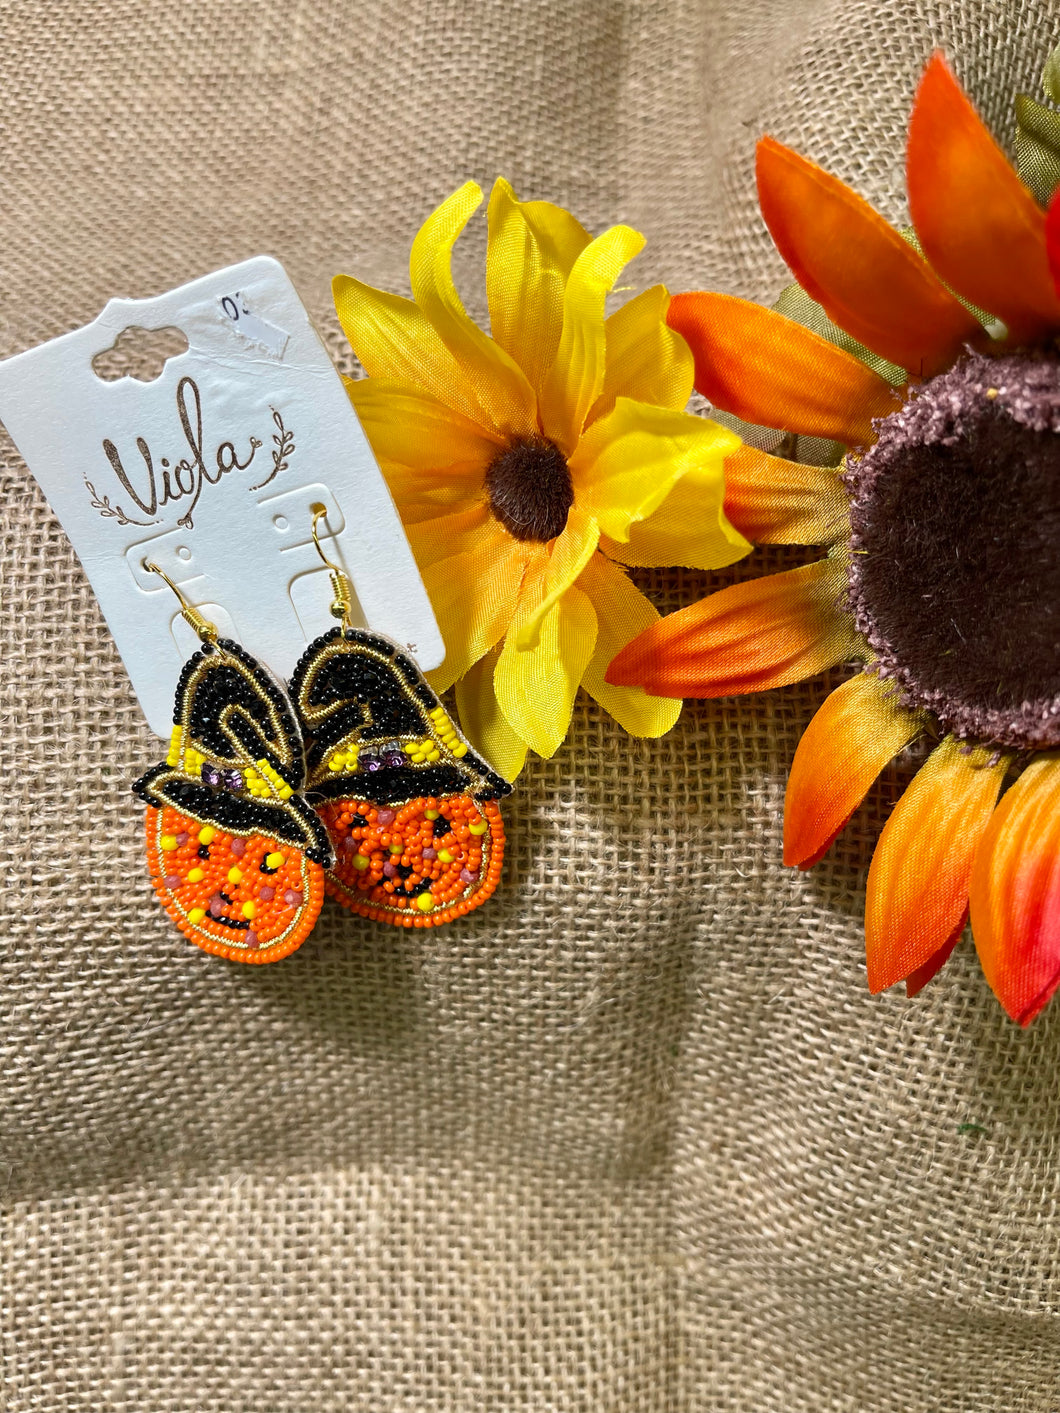 Pumpkins with Witches Hats Earrings